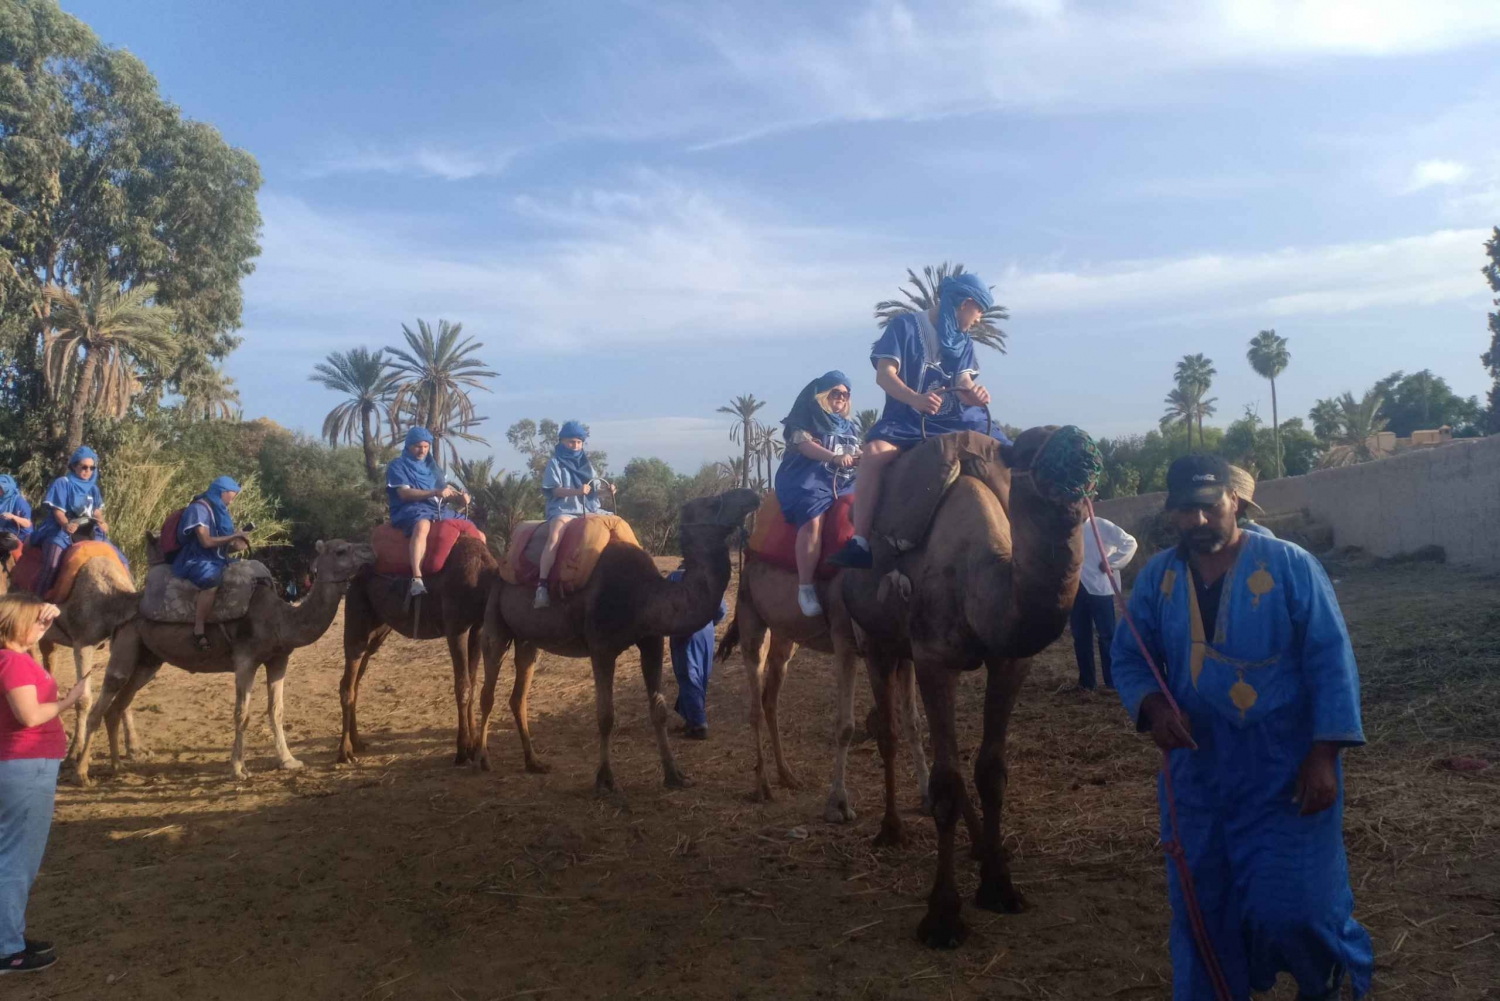 Marrakech: Sunset Camel Ride in the Palmeraie